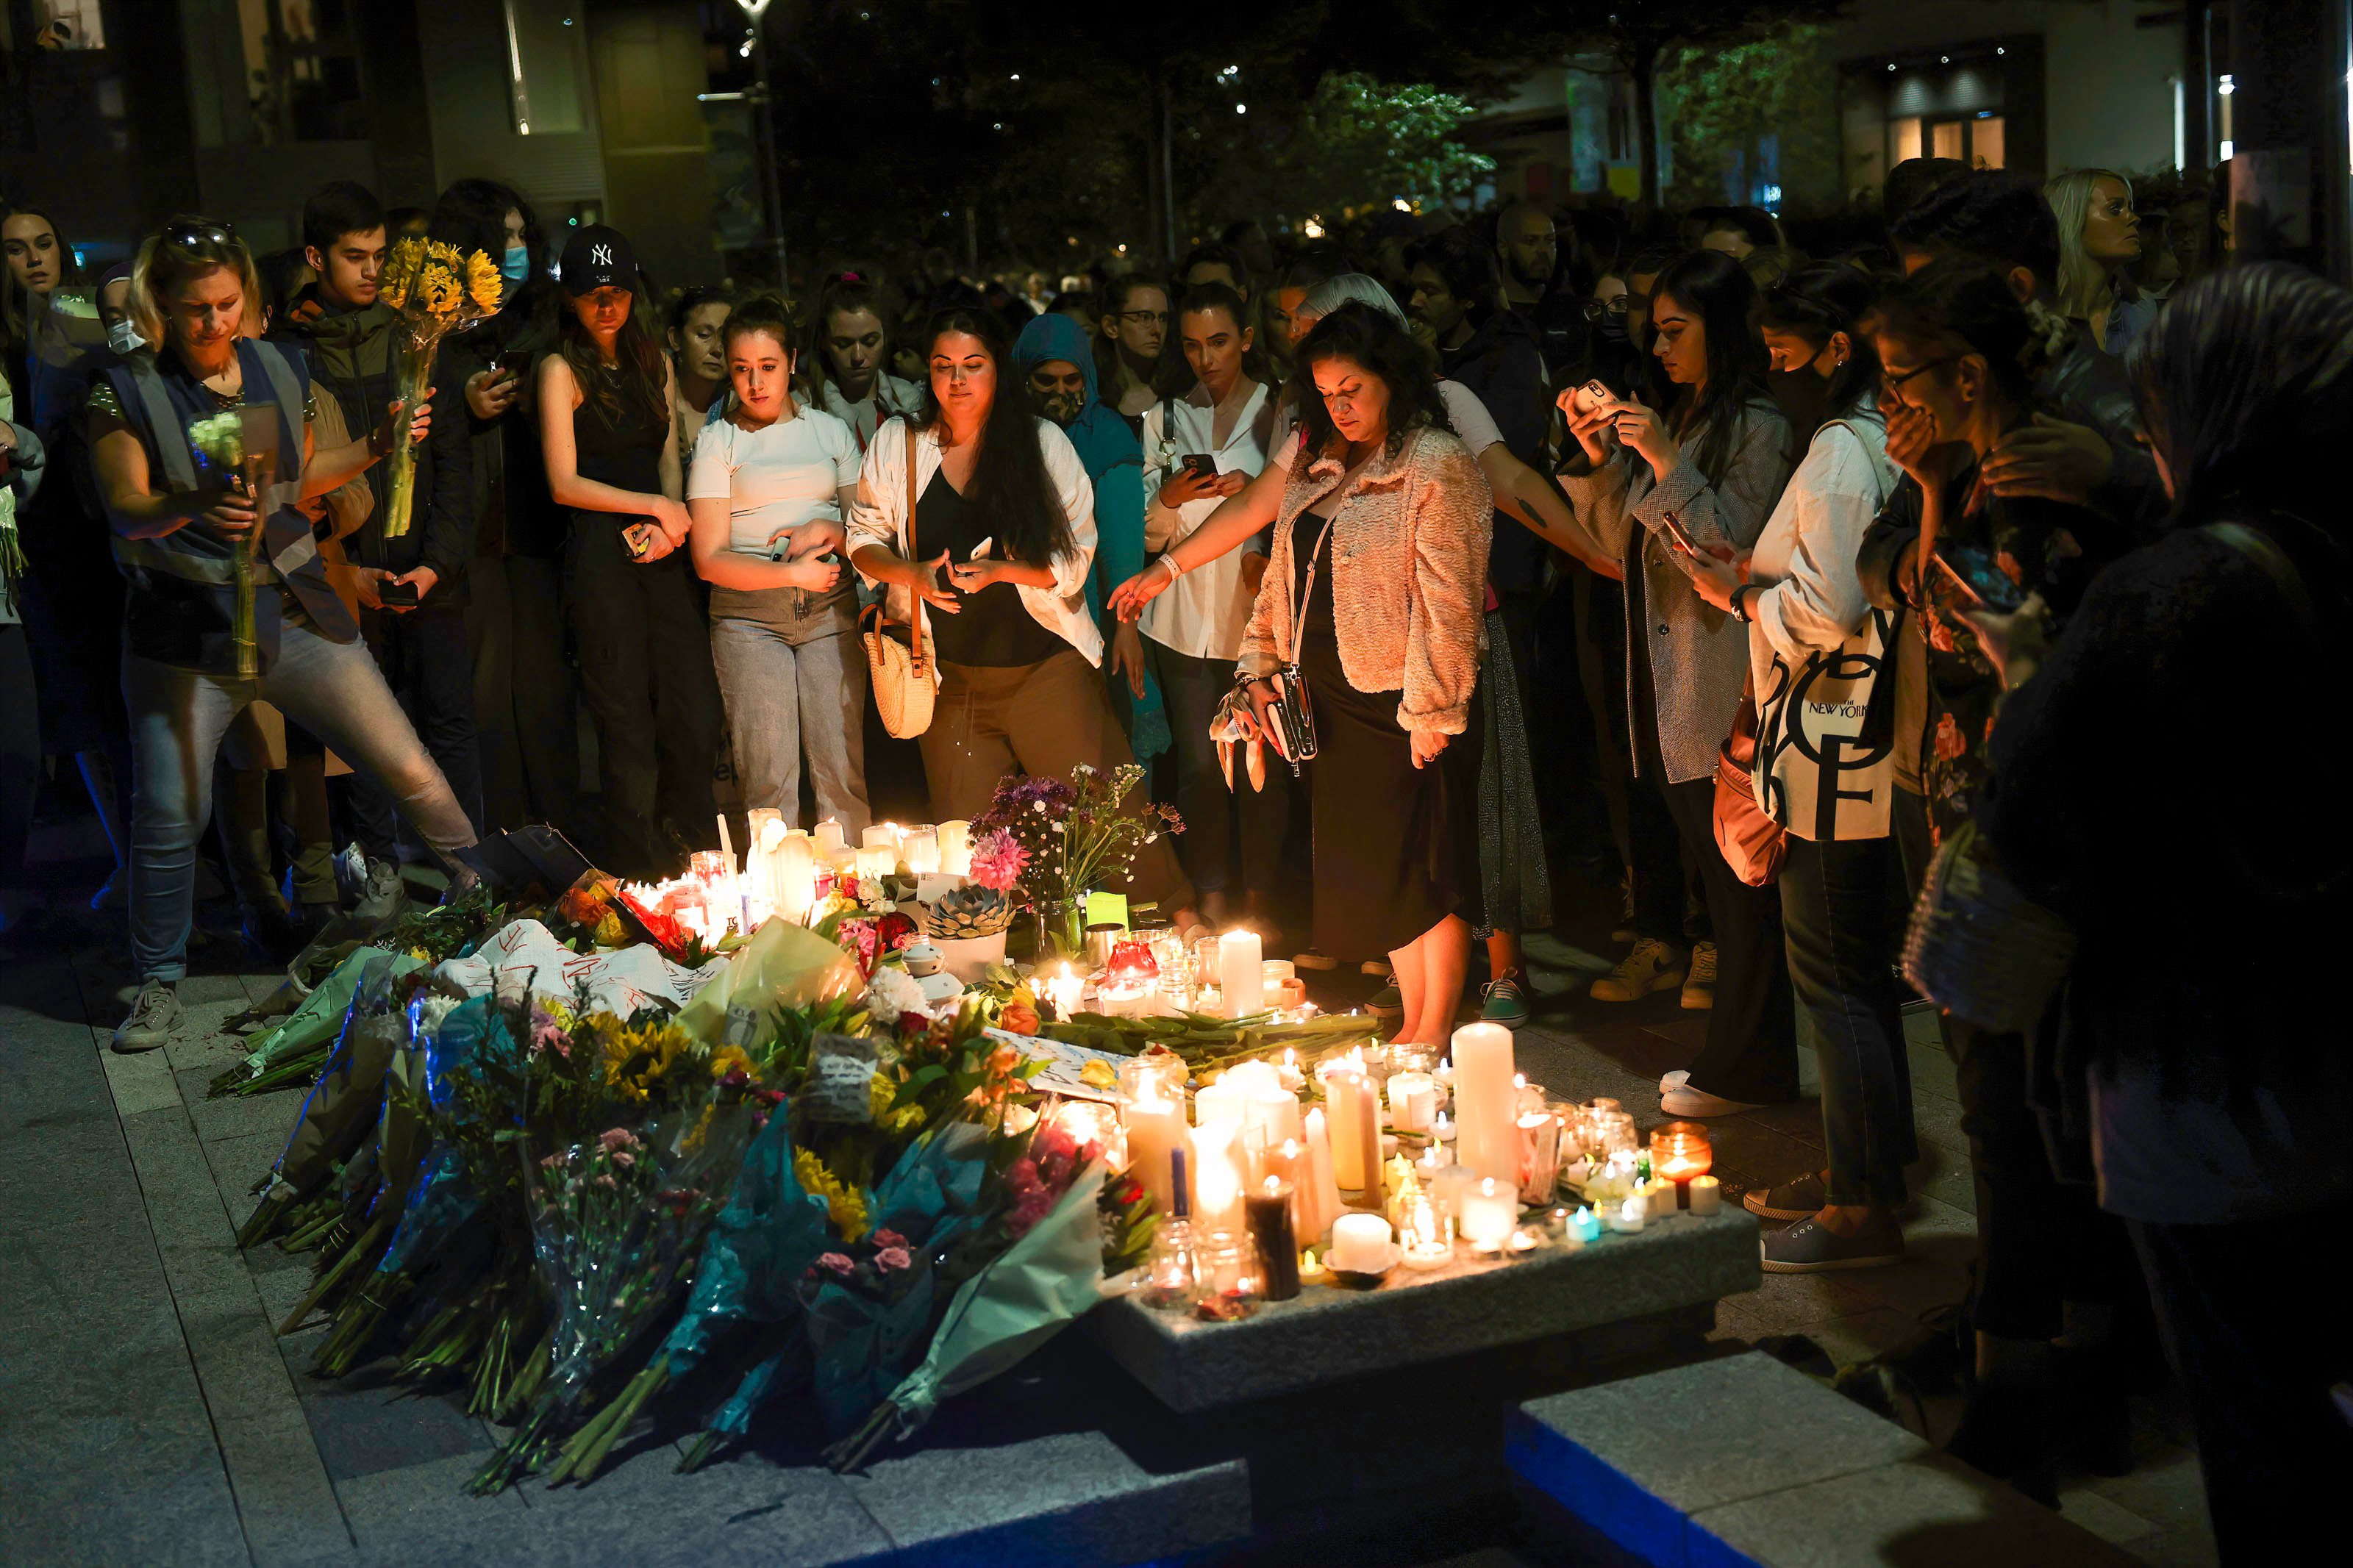 Participants are seen placing lit candles and flowers during